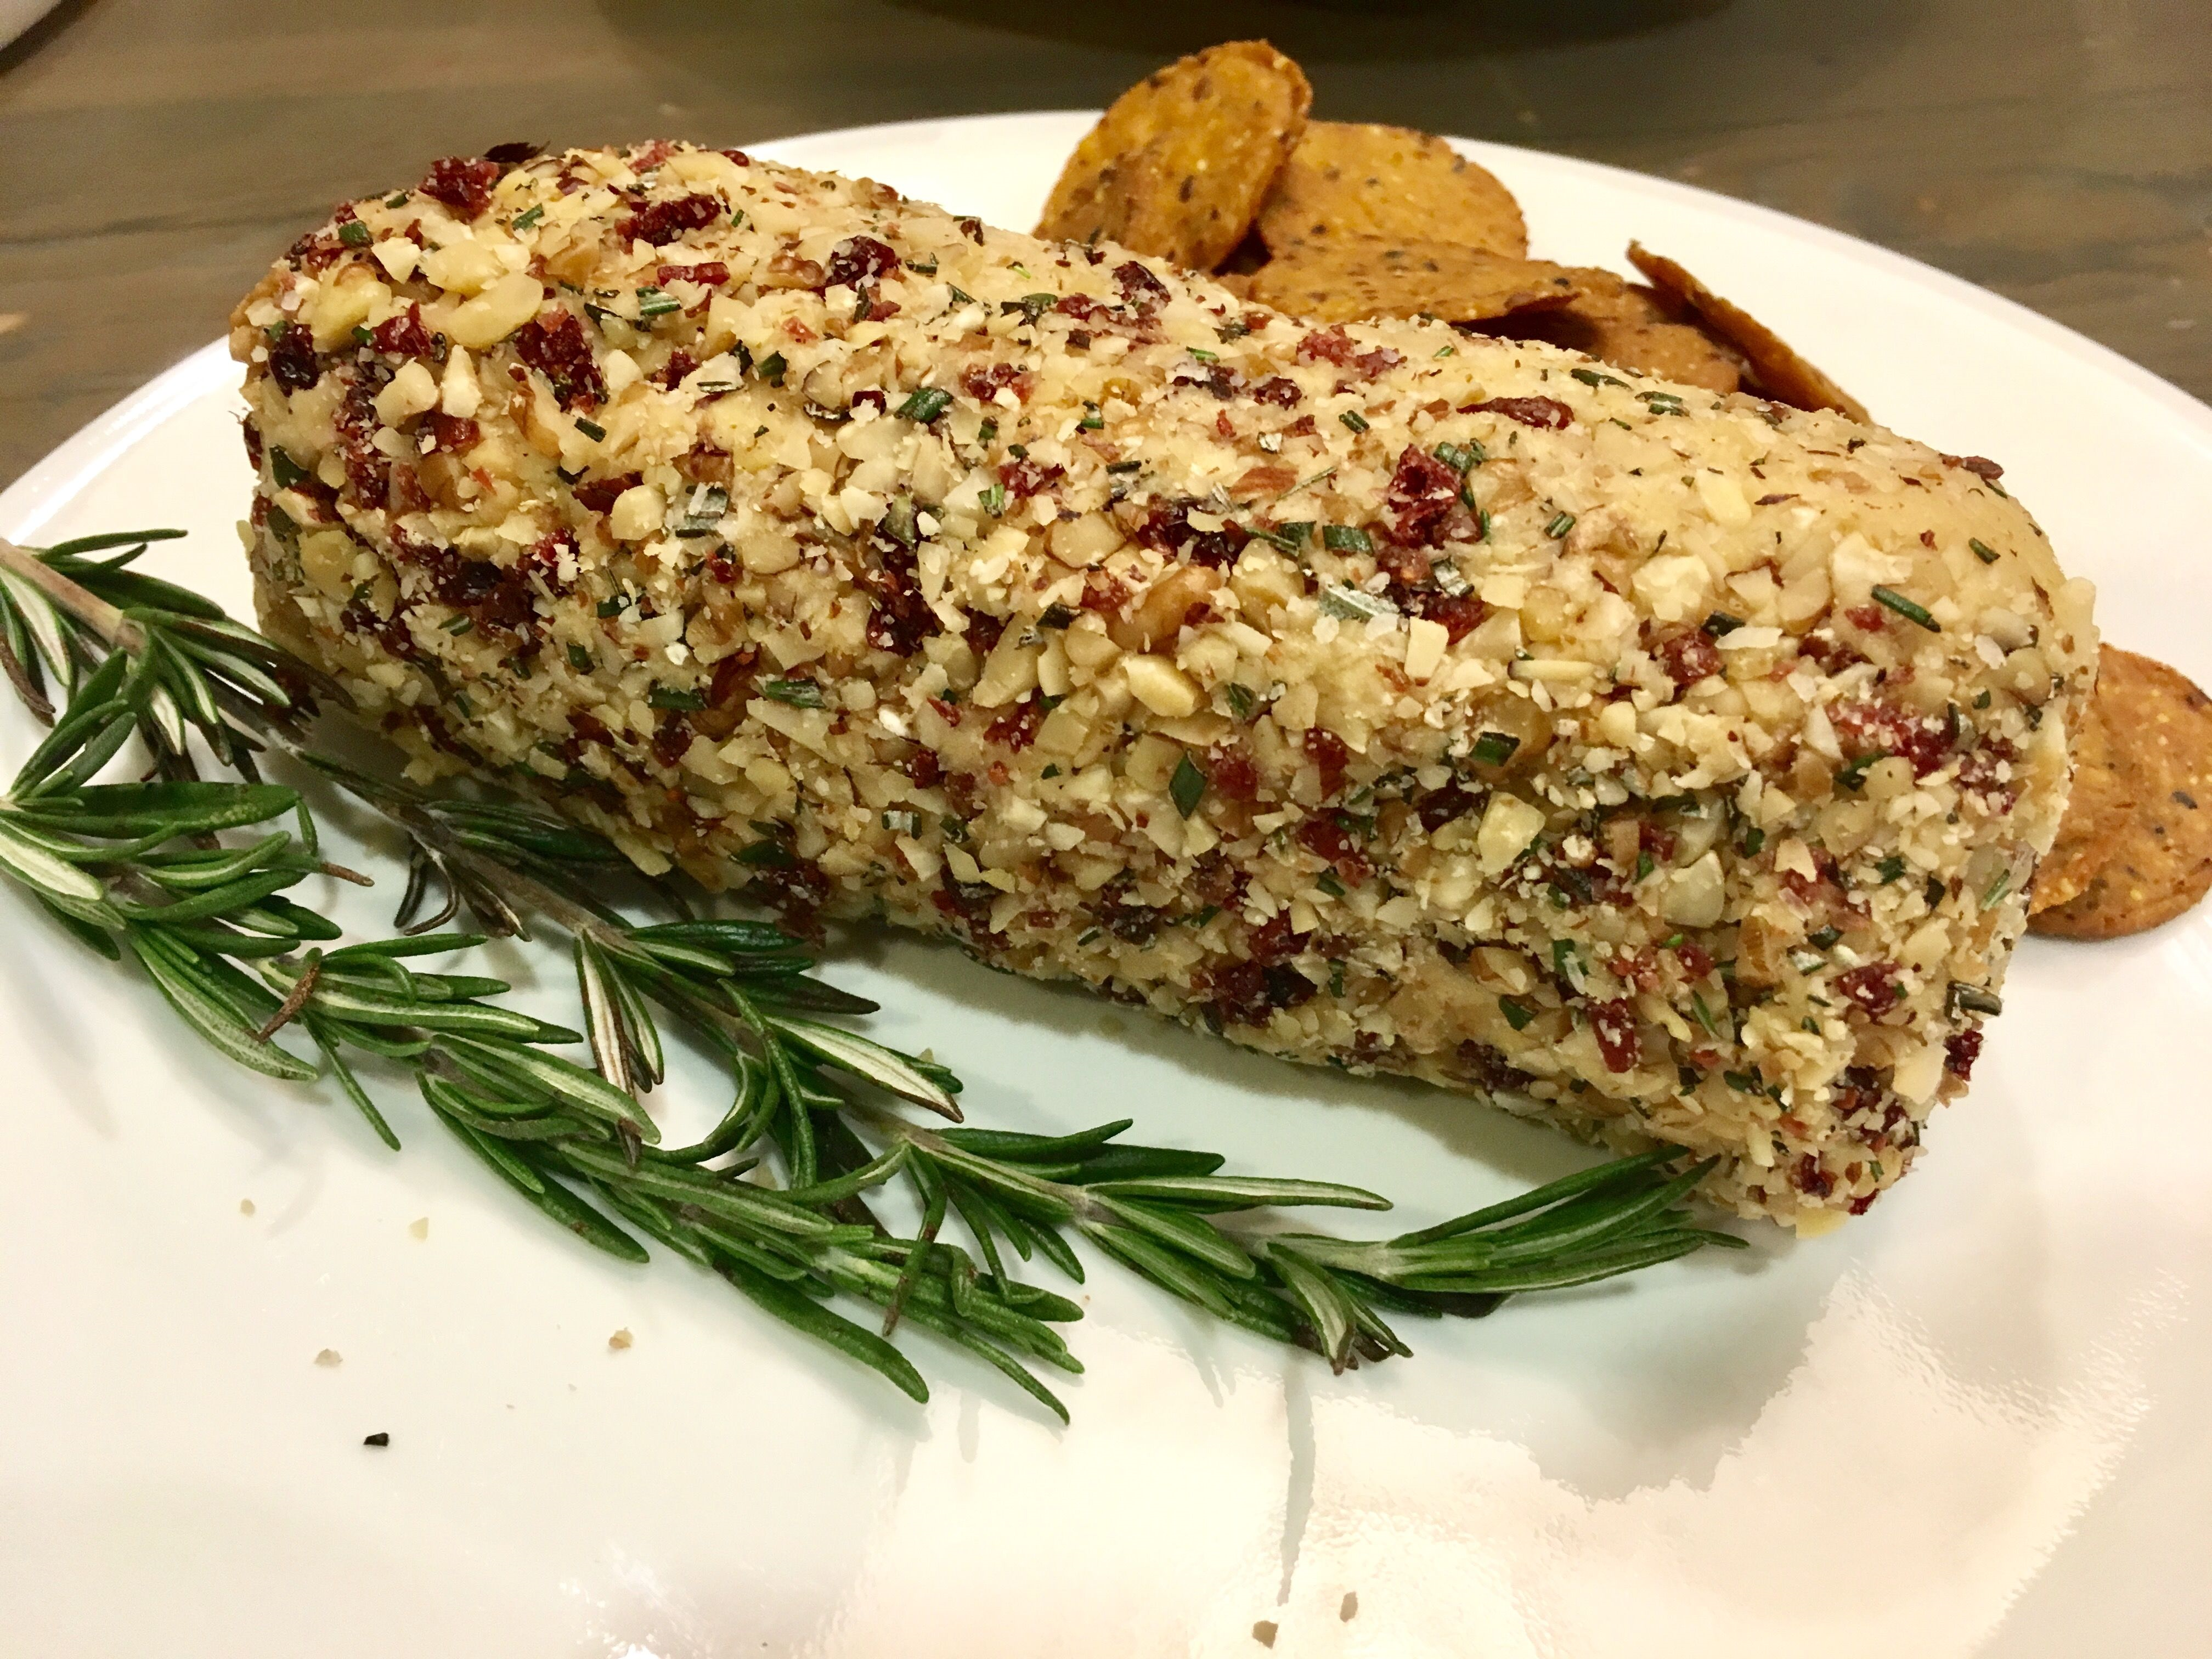 Vegan Cashew Cheese Rolled in Cranberries and Nuts